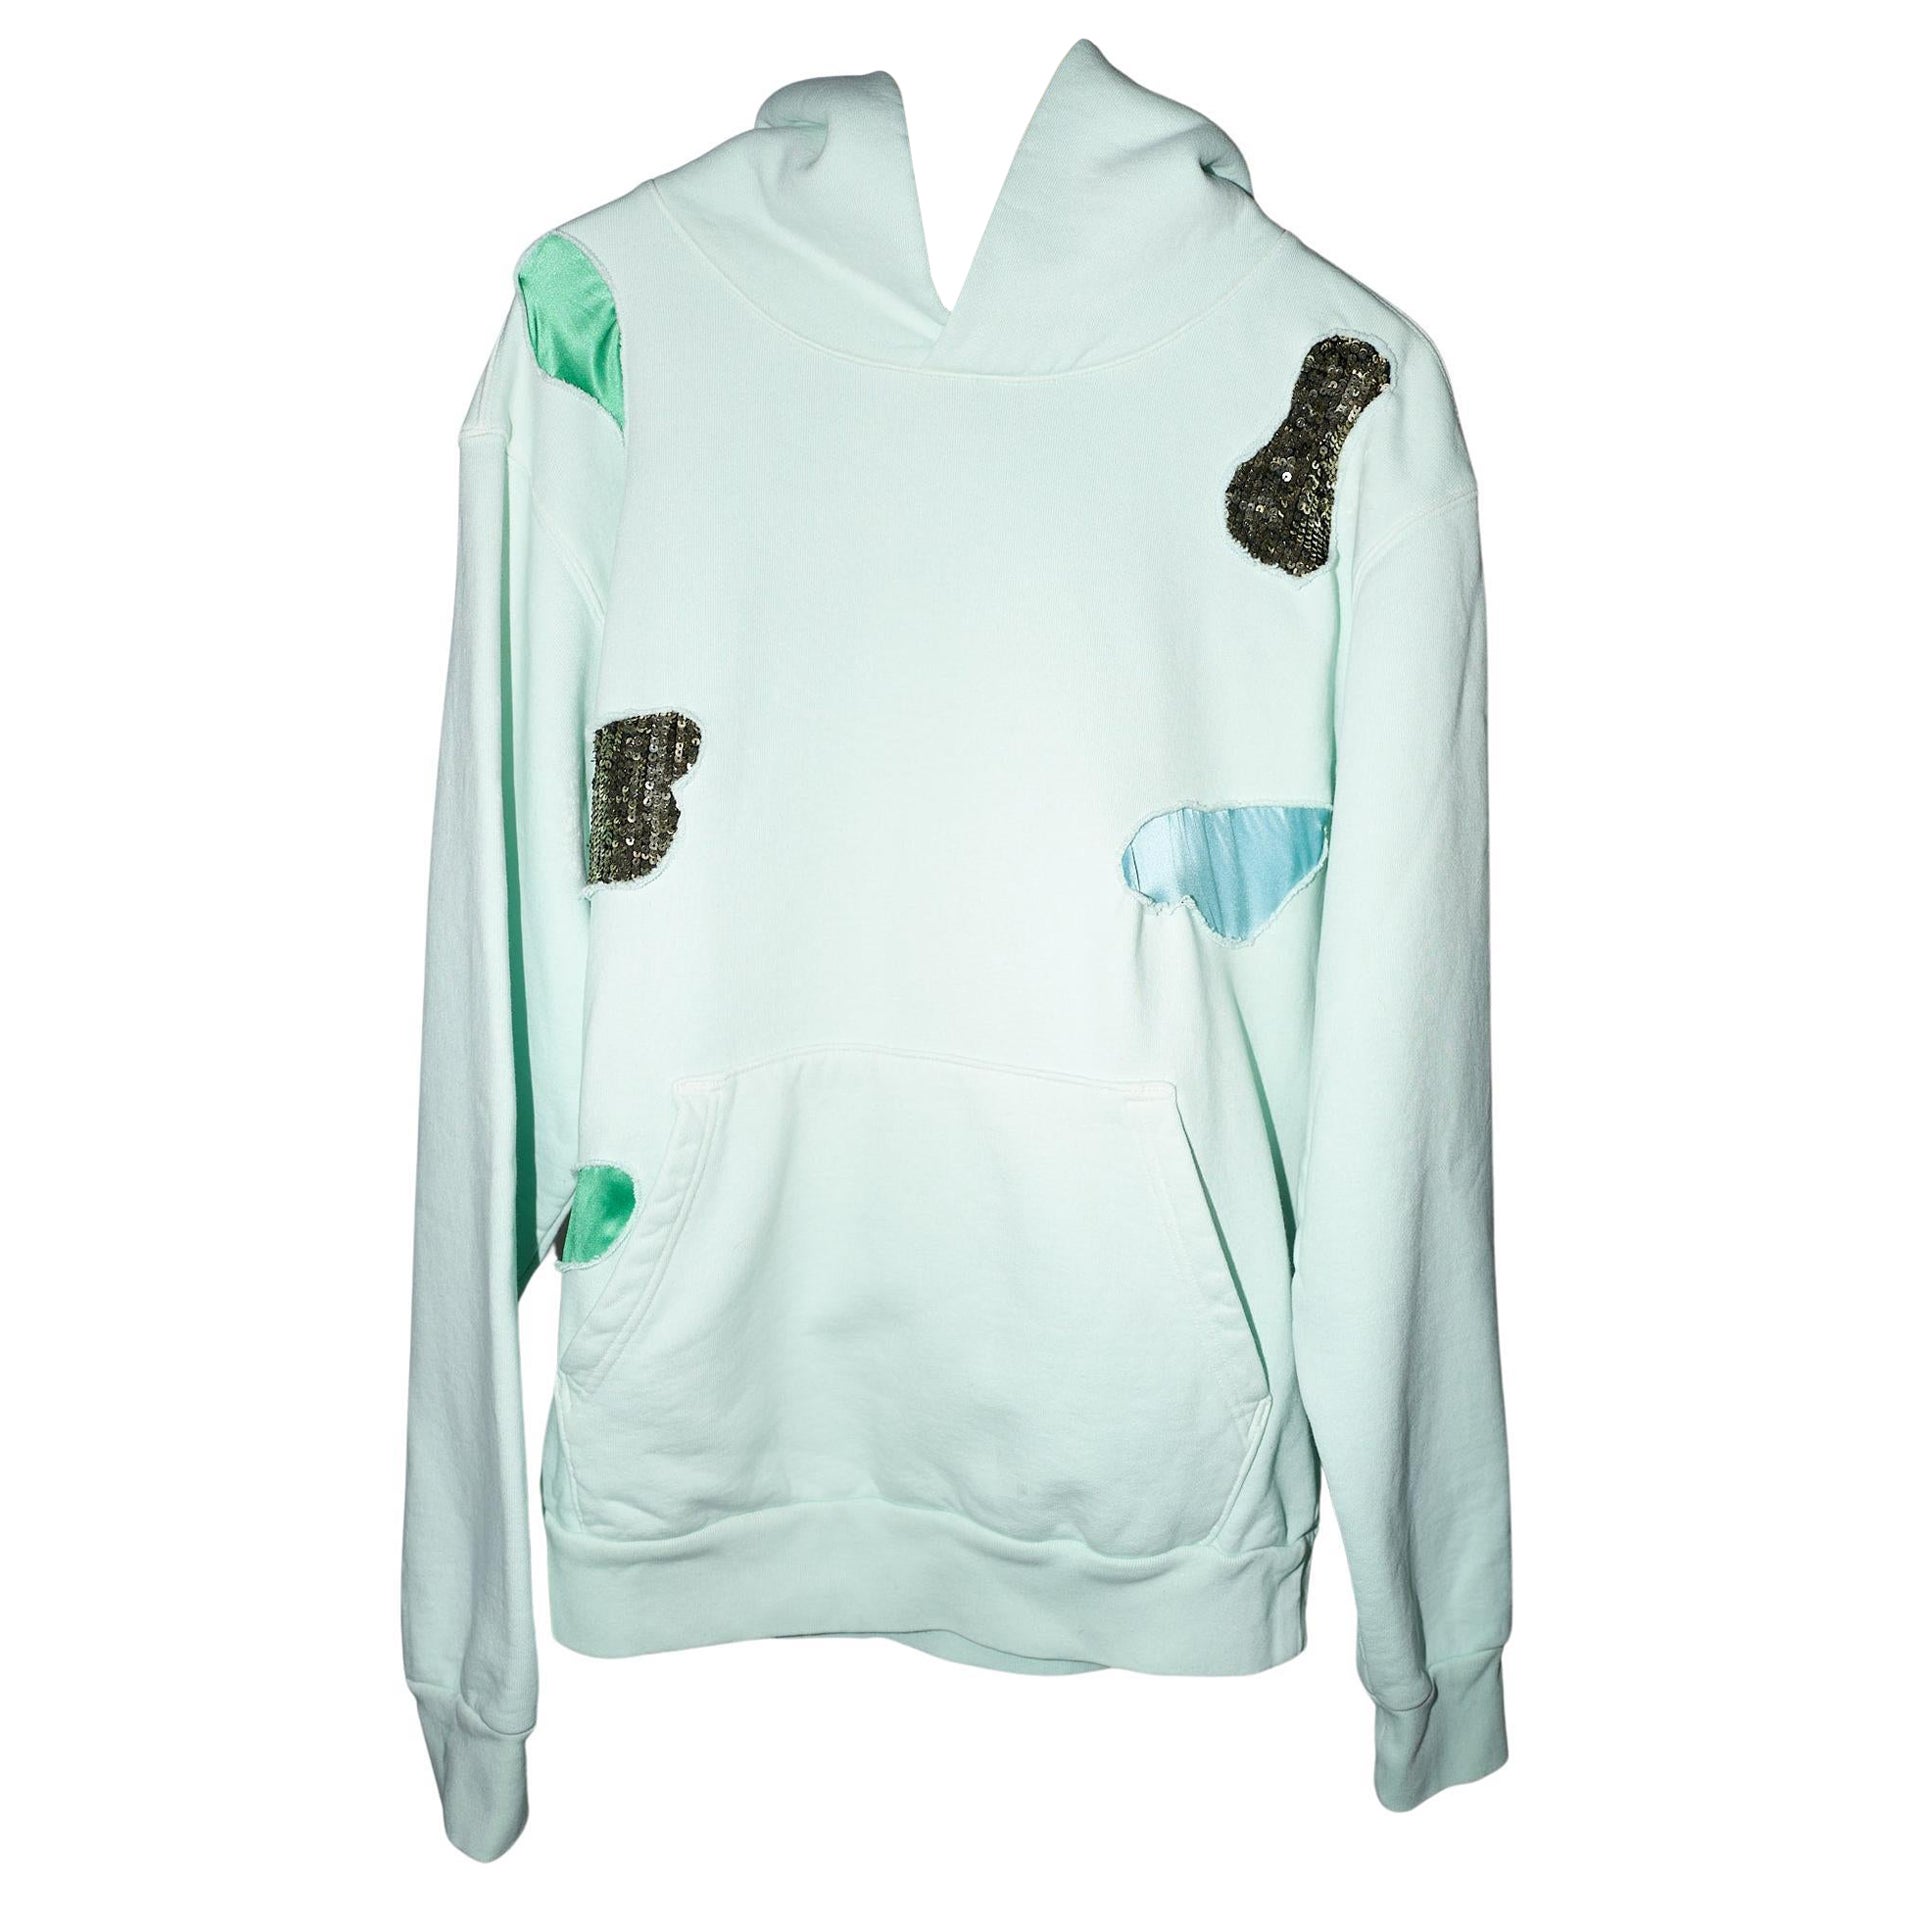 Brand: J Dauphin
Hoodie Organic Cotton Mint Green Patch Work J Dauphin

Available in Size Small, Medium or Large


The tees express a hybrid of easy-luxe and bourgeoisie jet-set look. Effortless and versatile, elegant and classy they bring an allure